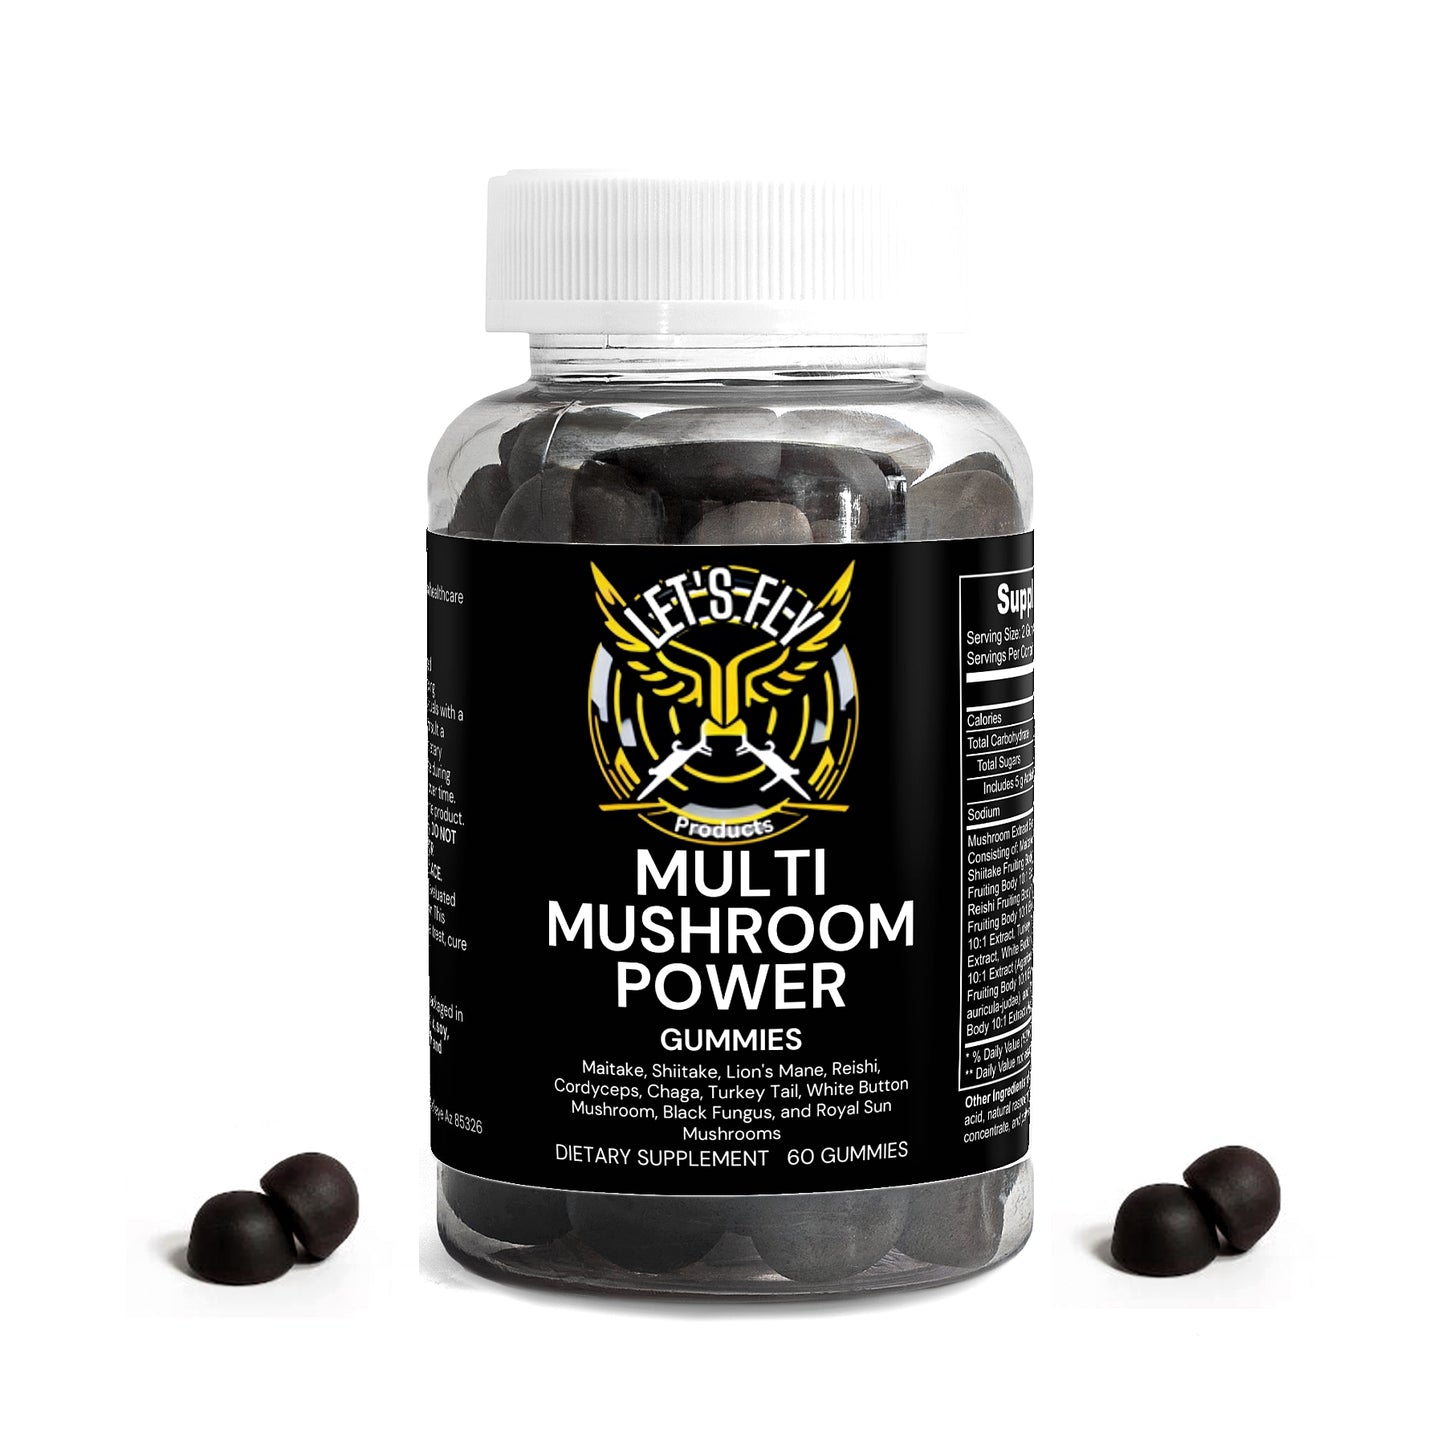 Multi Mushroom Power - Let's Fly Products